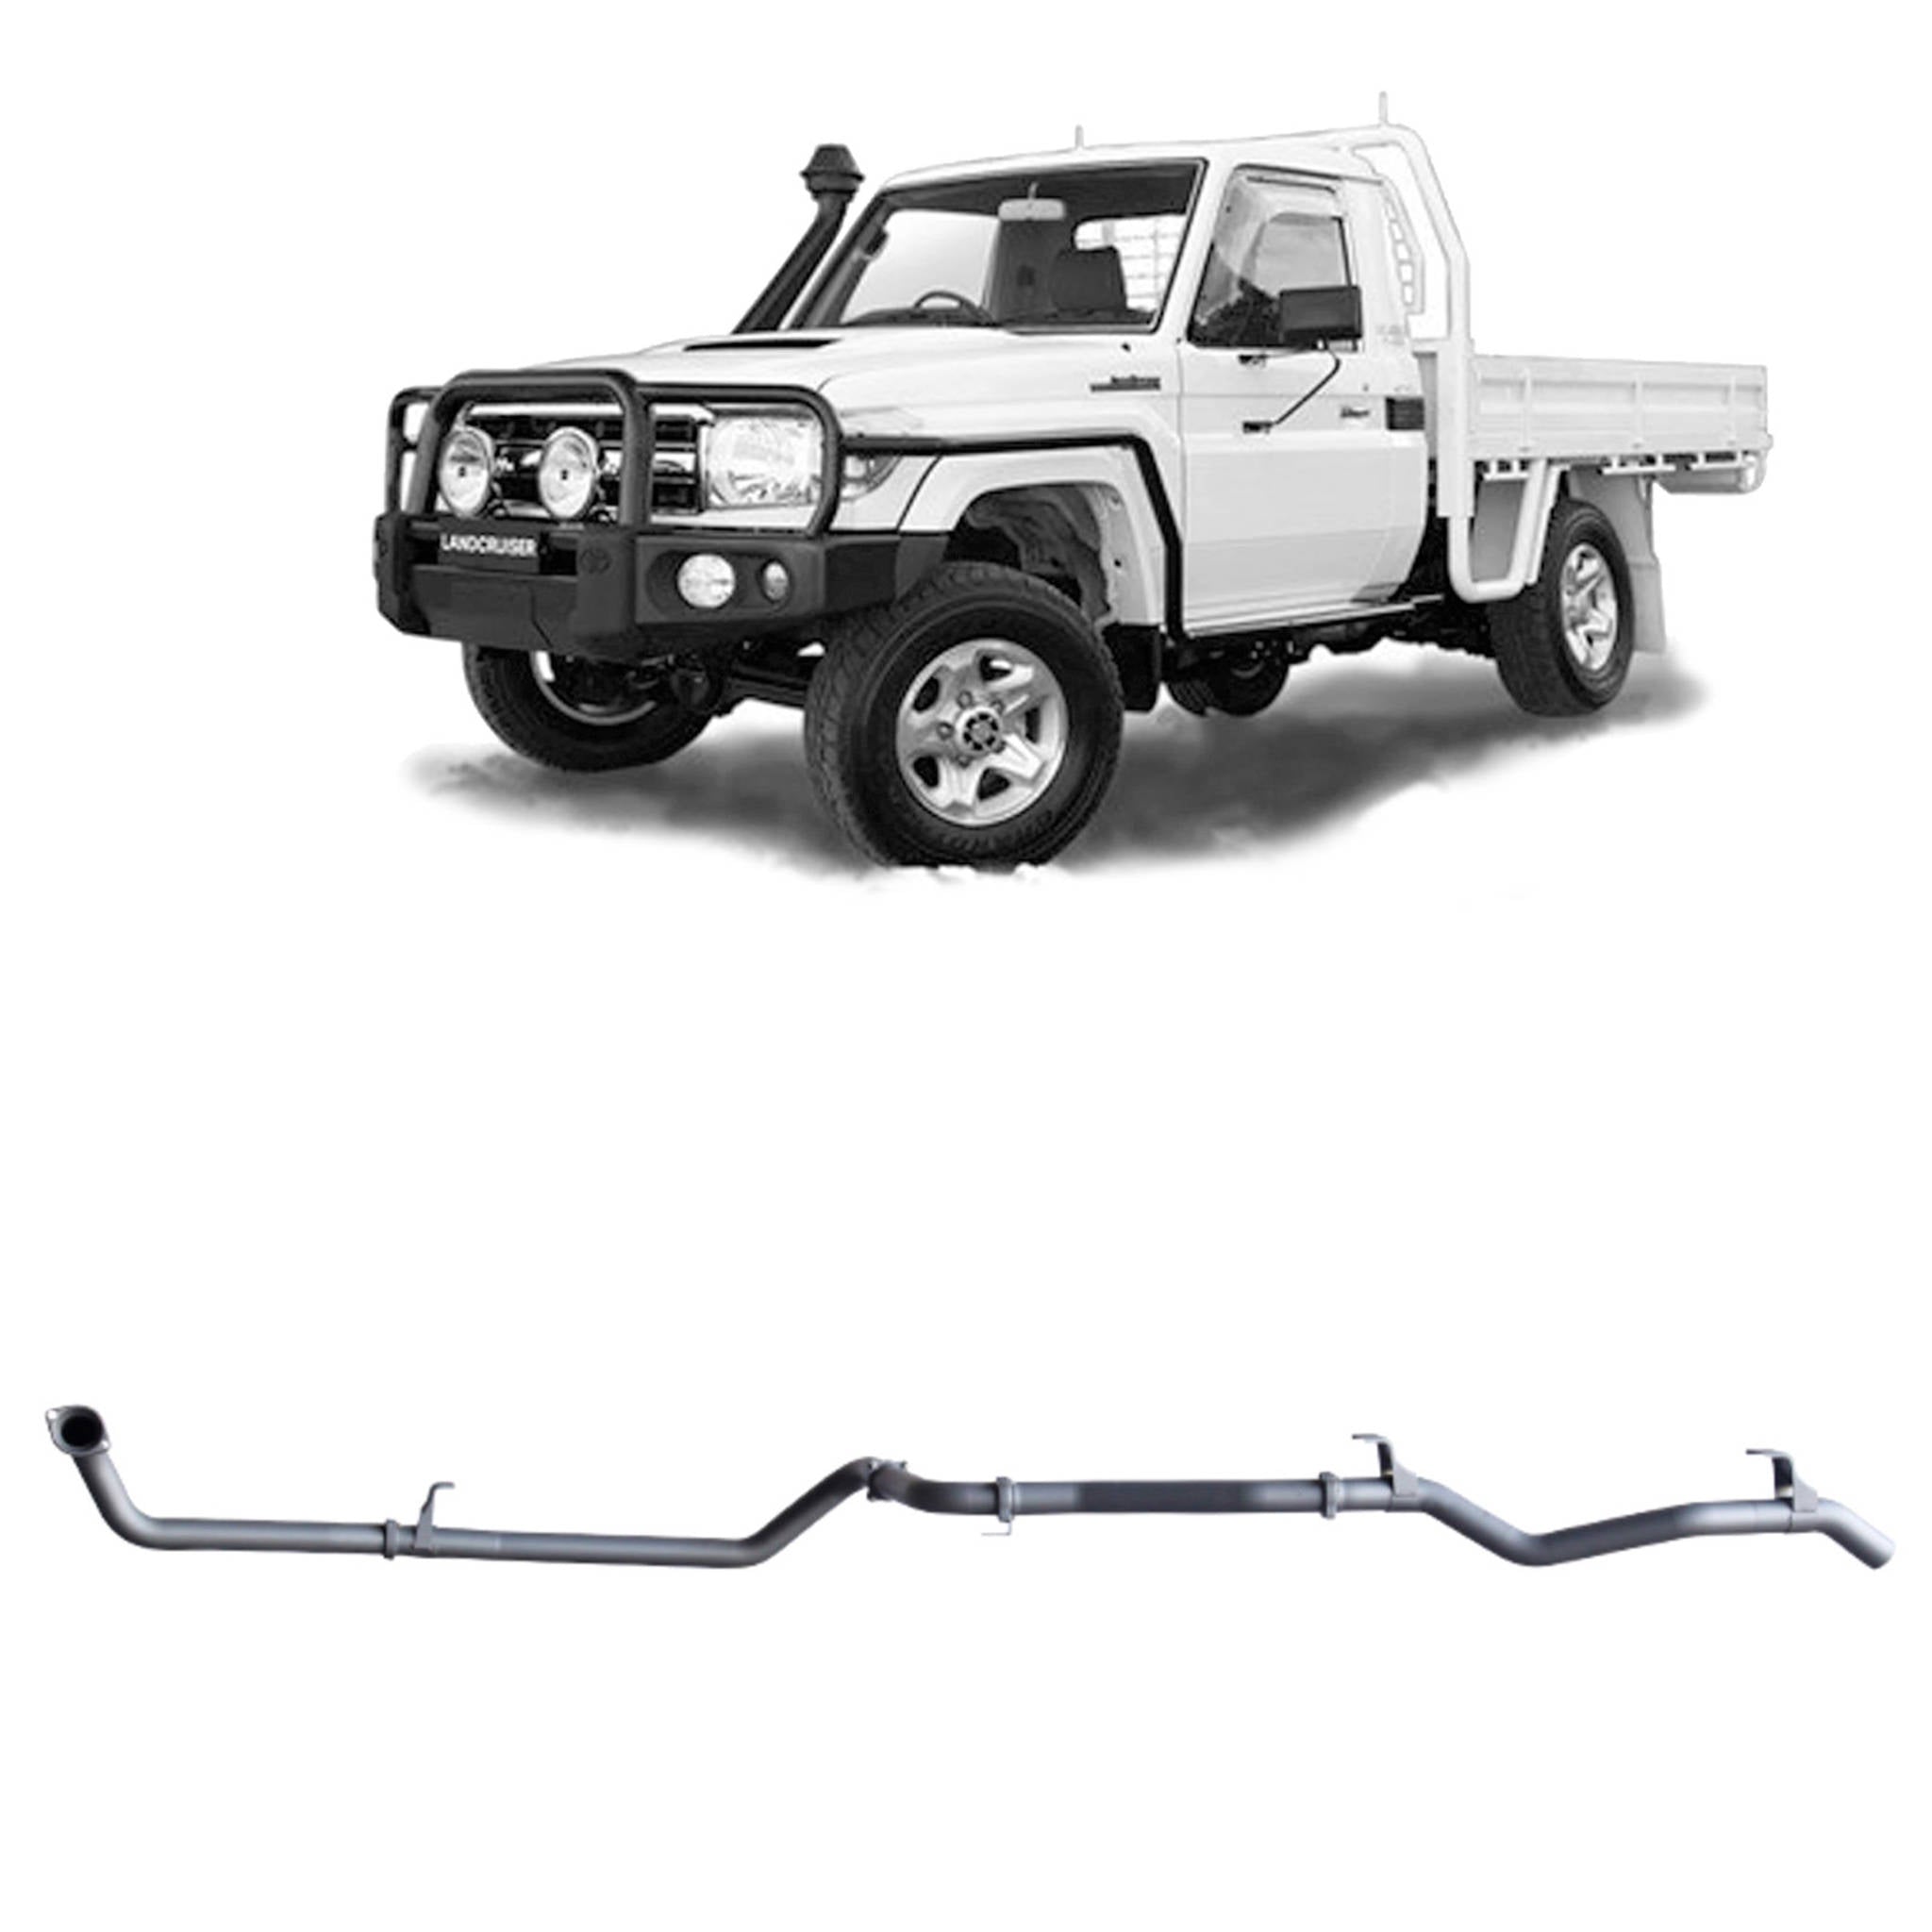 Redback Extreme Duty Exhaust to suit Toyota Landcruiser 79 Series 4.2L TD (01/2001 - 01/2007)